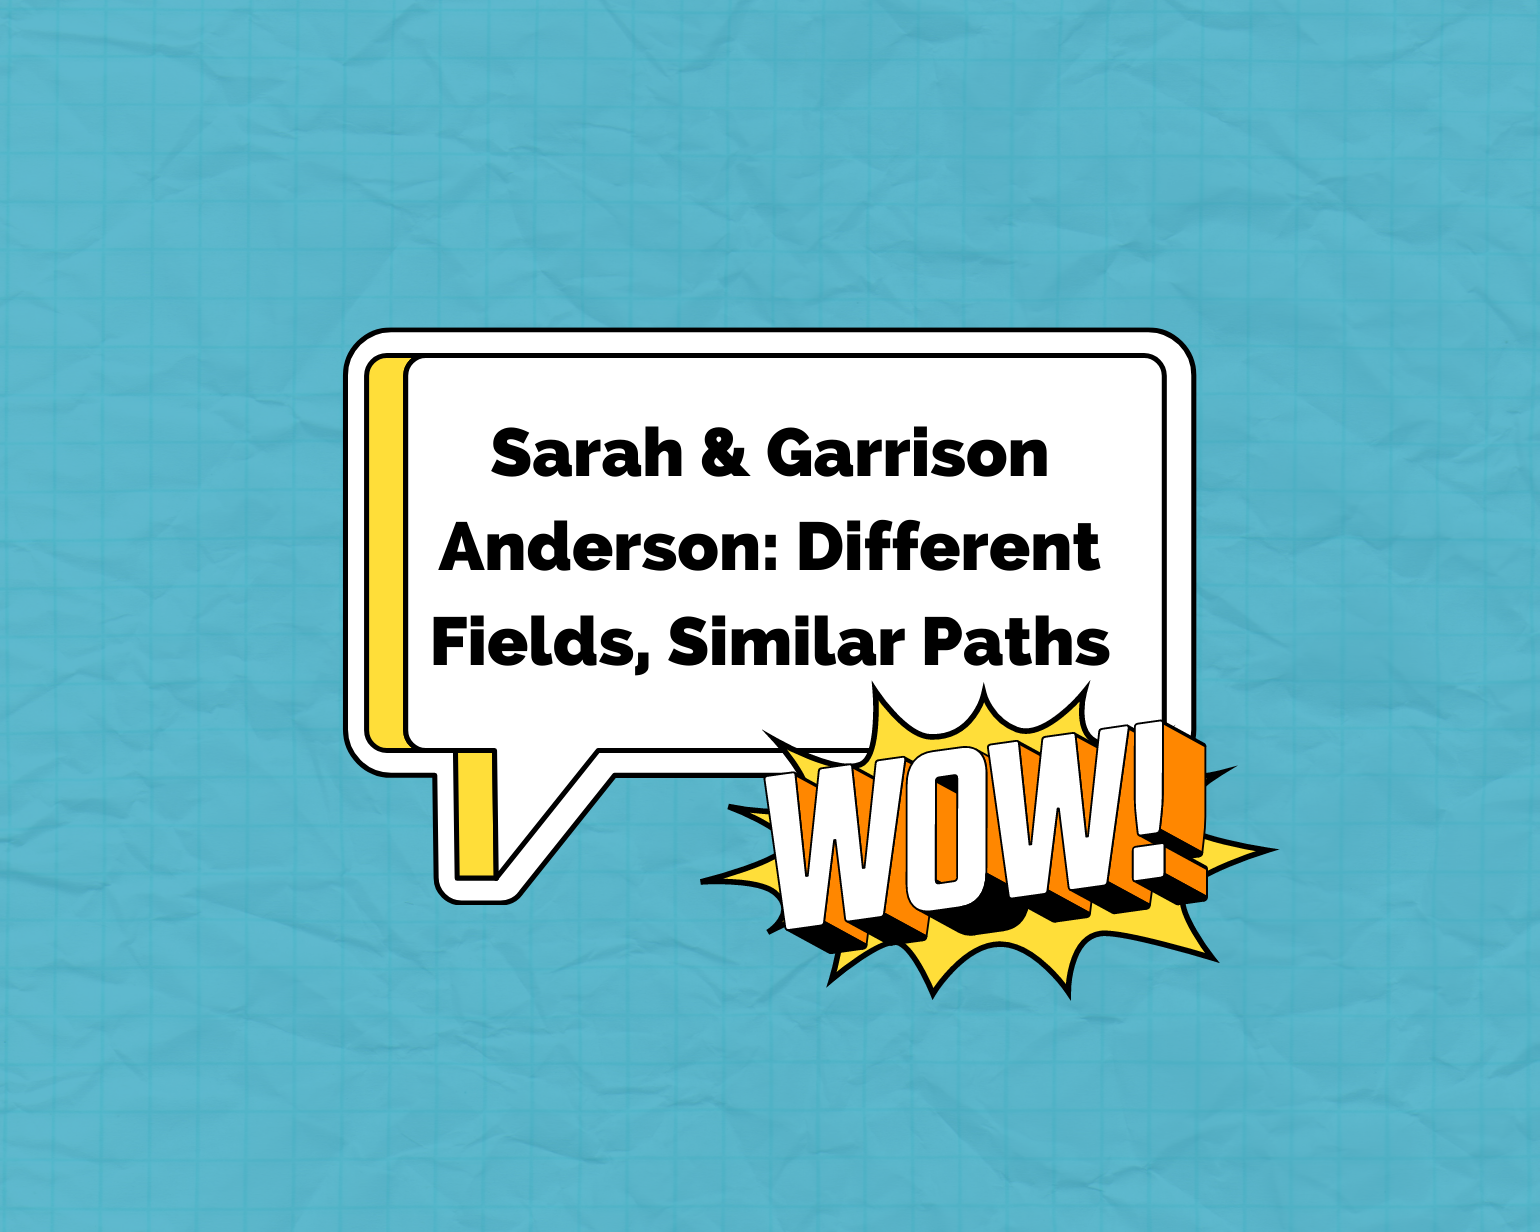 Image with text - Sarah and Garrison Anderson Different Fields, Similar Path